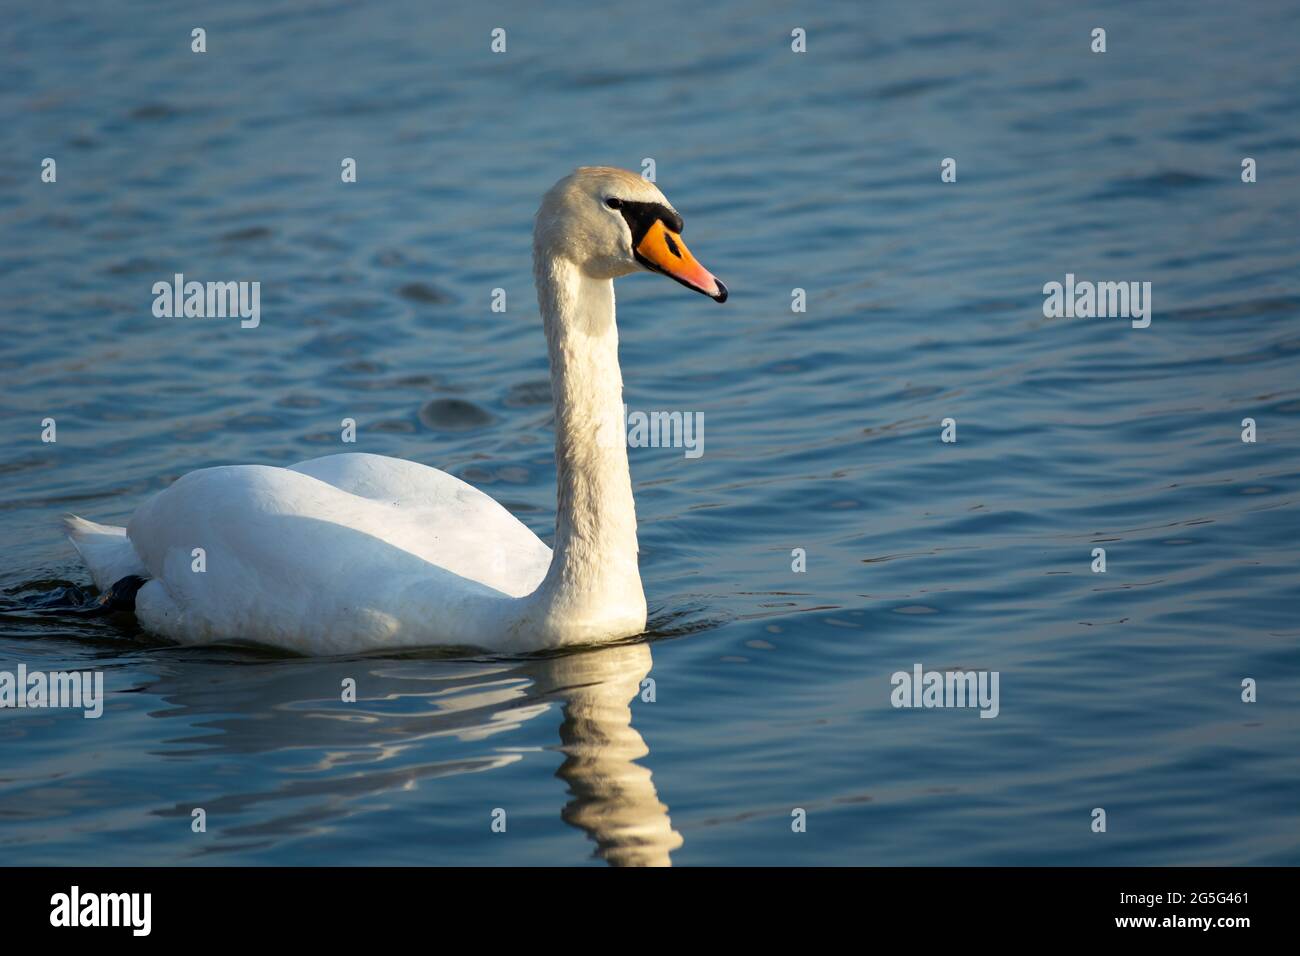 White single swan swimming on the water, Stankow, Lubelskie, Poland Stock Photo